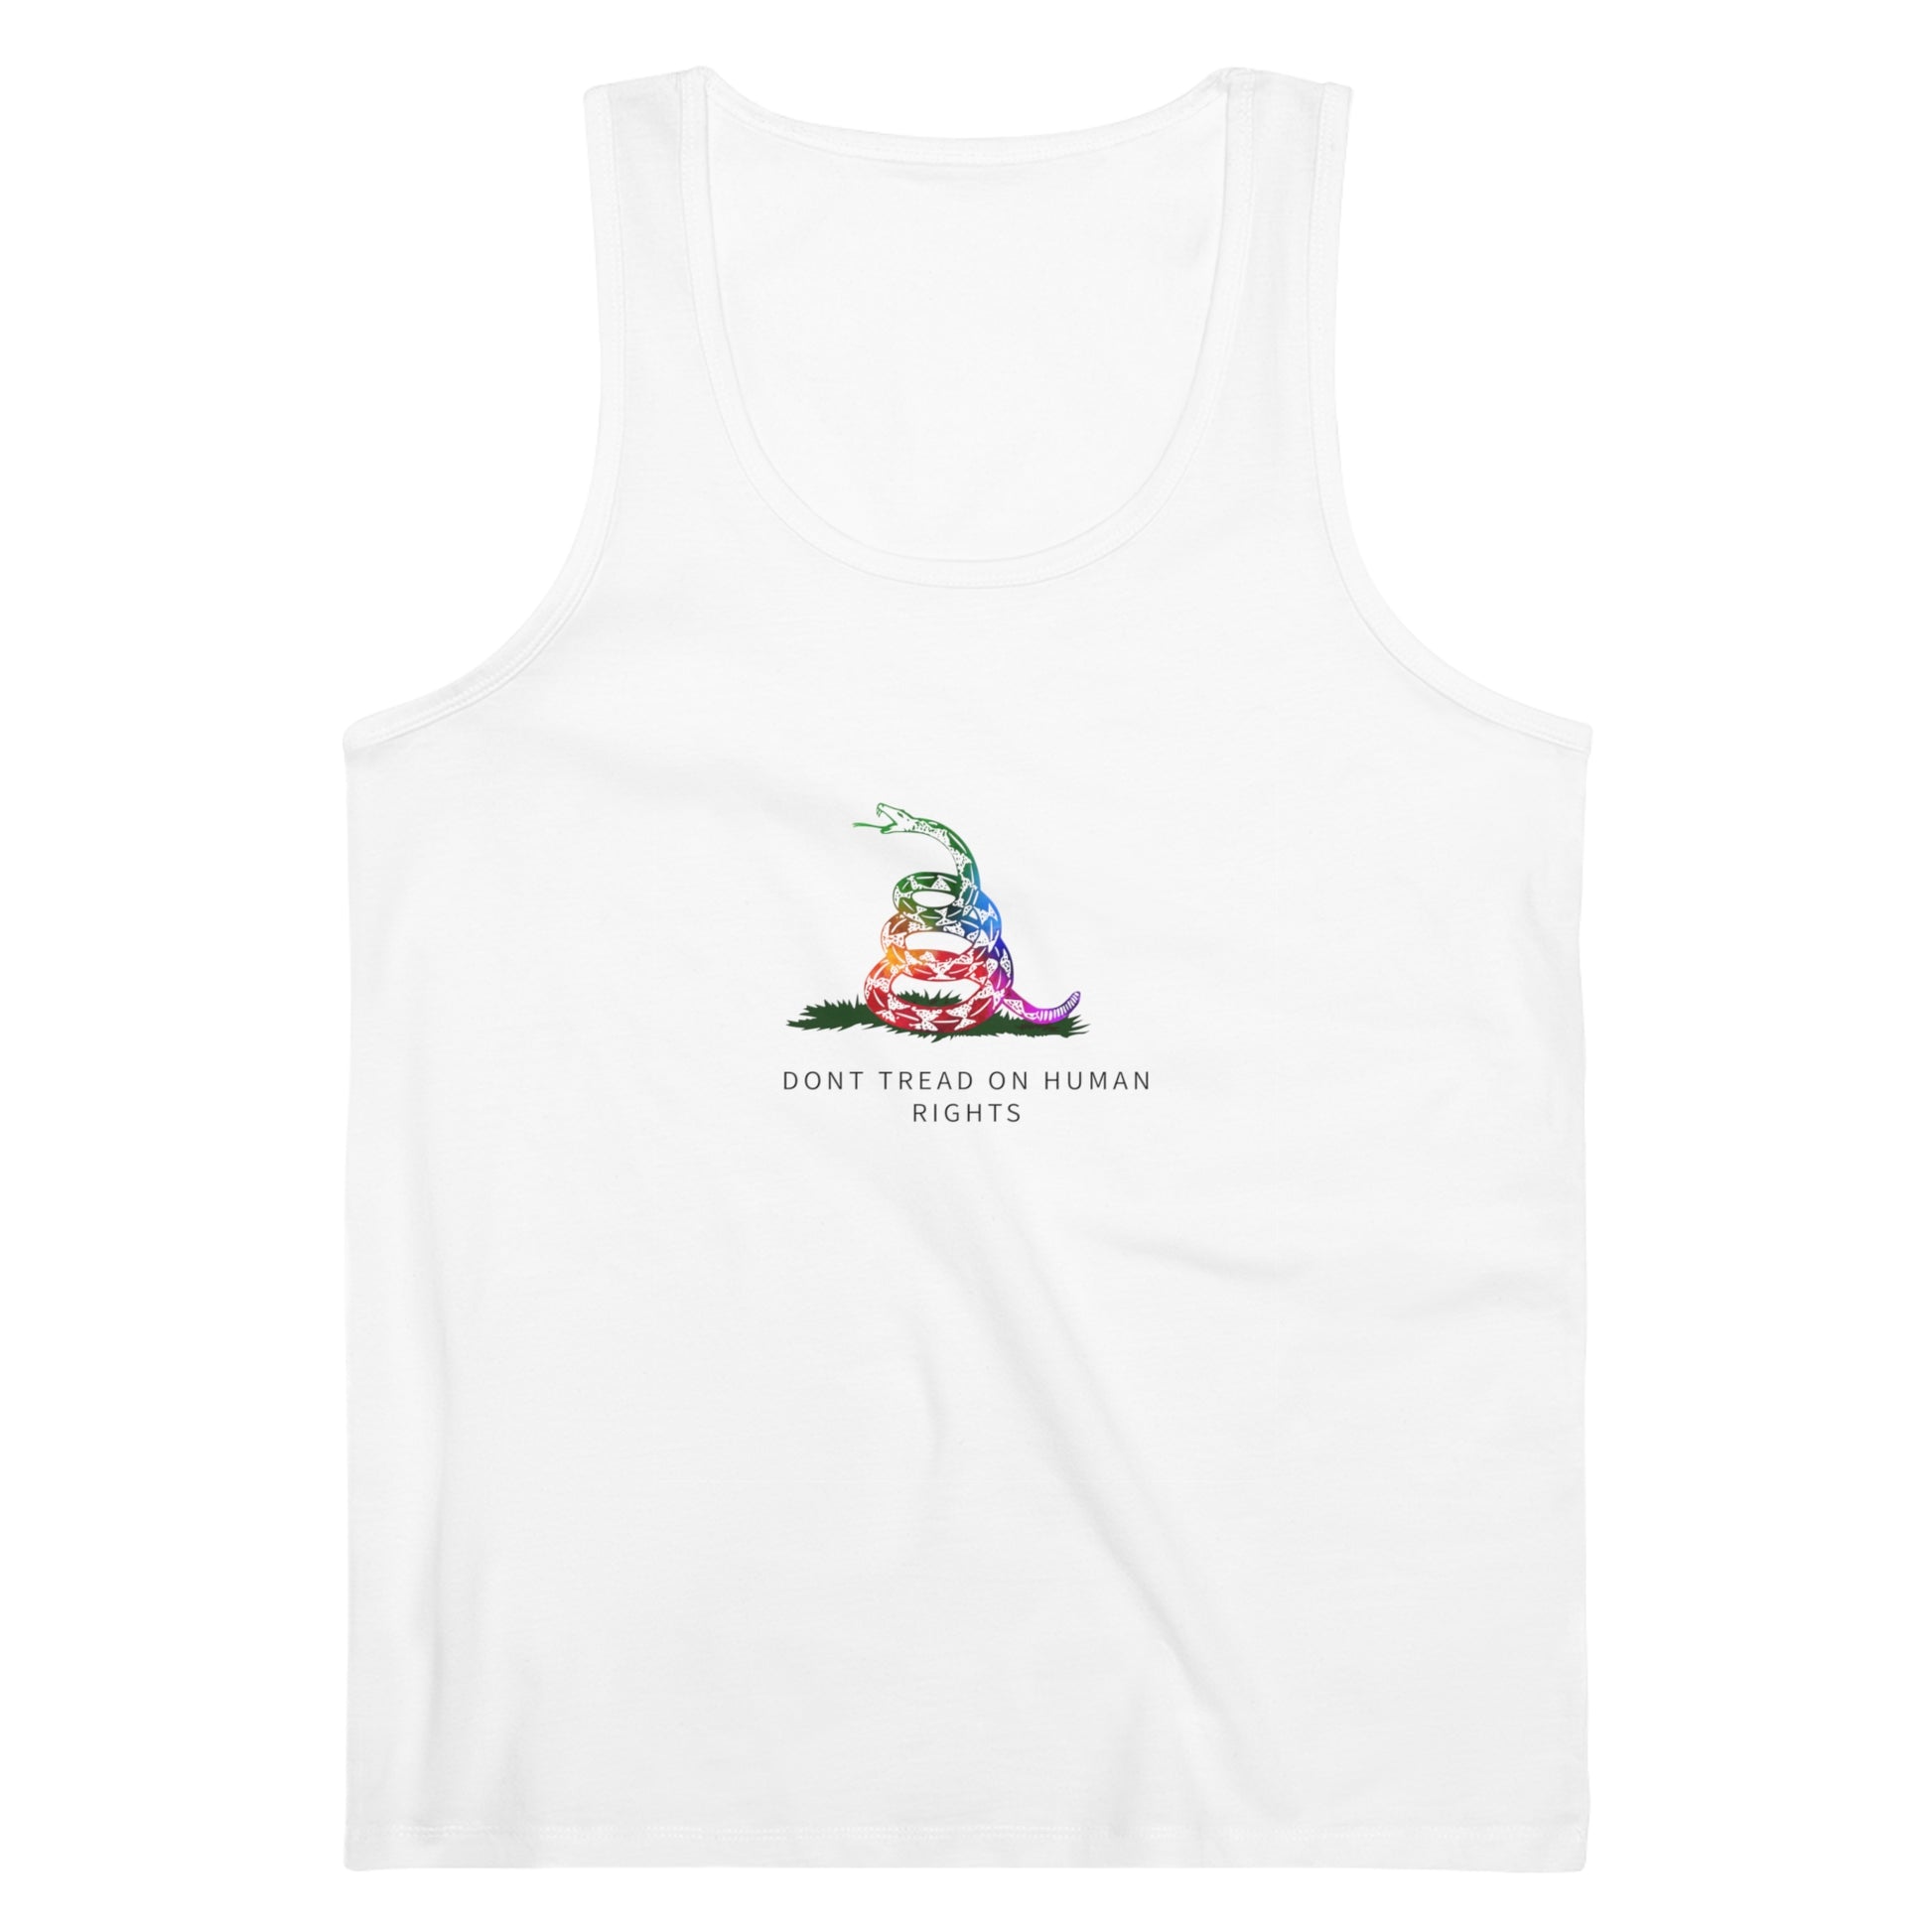 DONT TREAD ON HUMAN RIGHTS | Jersey Tank LGBTQ Queer Gay Protest Rally Pride Gadsden flag Congress